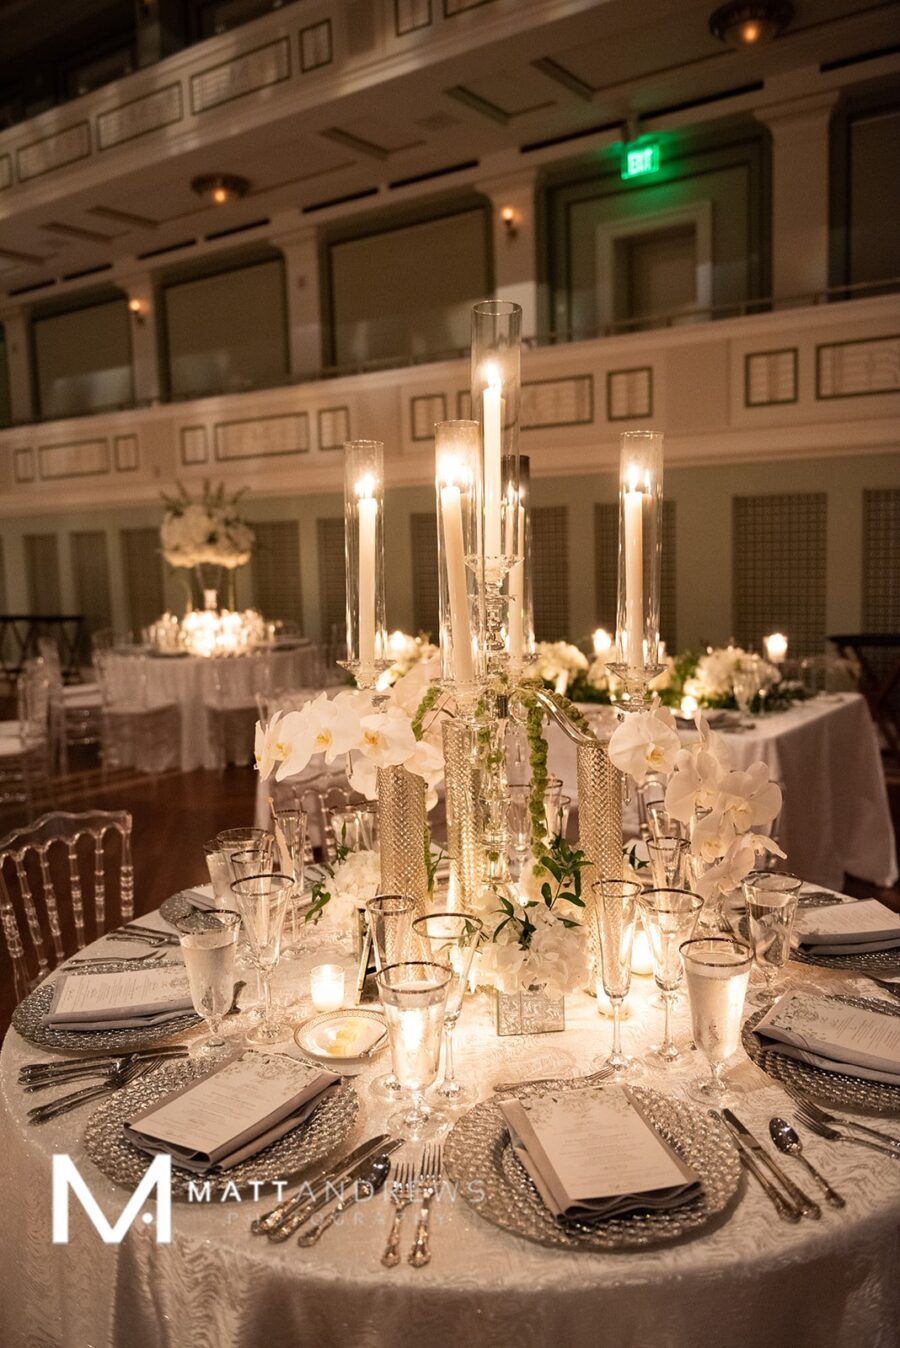 Elevated candlelight wedding centerpieces: Floral Filled Luxurious Wedding by LMA Designs featured on Nashville Bride Guide